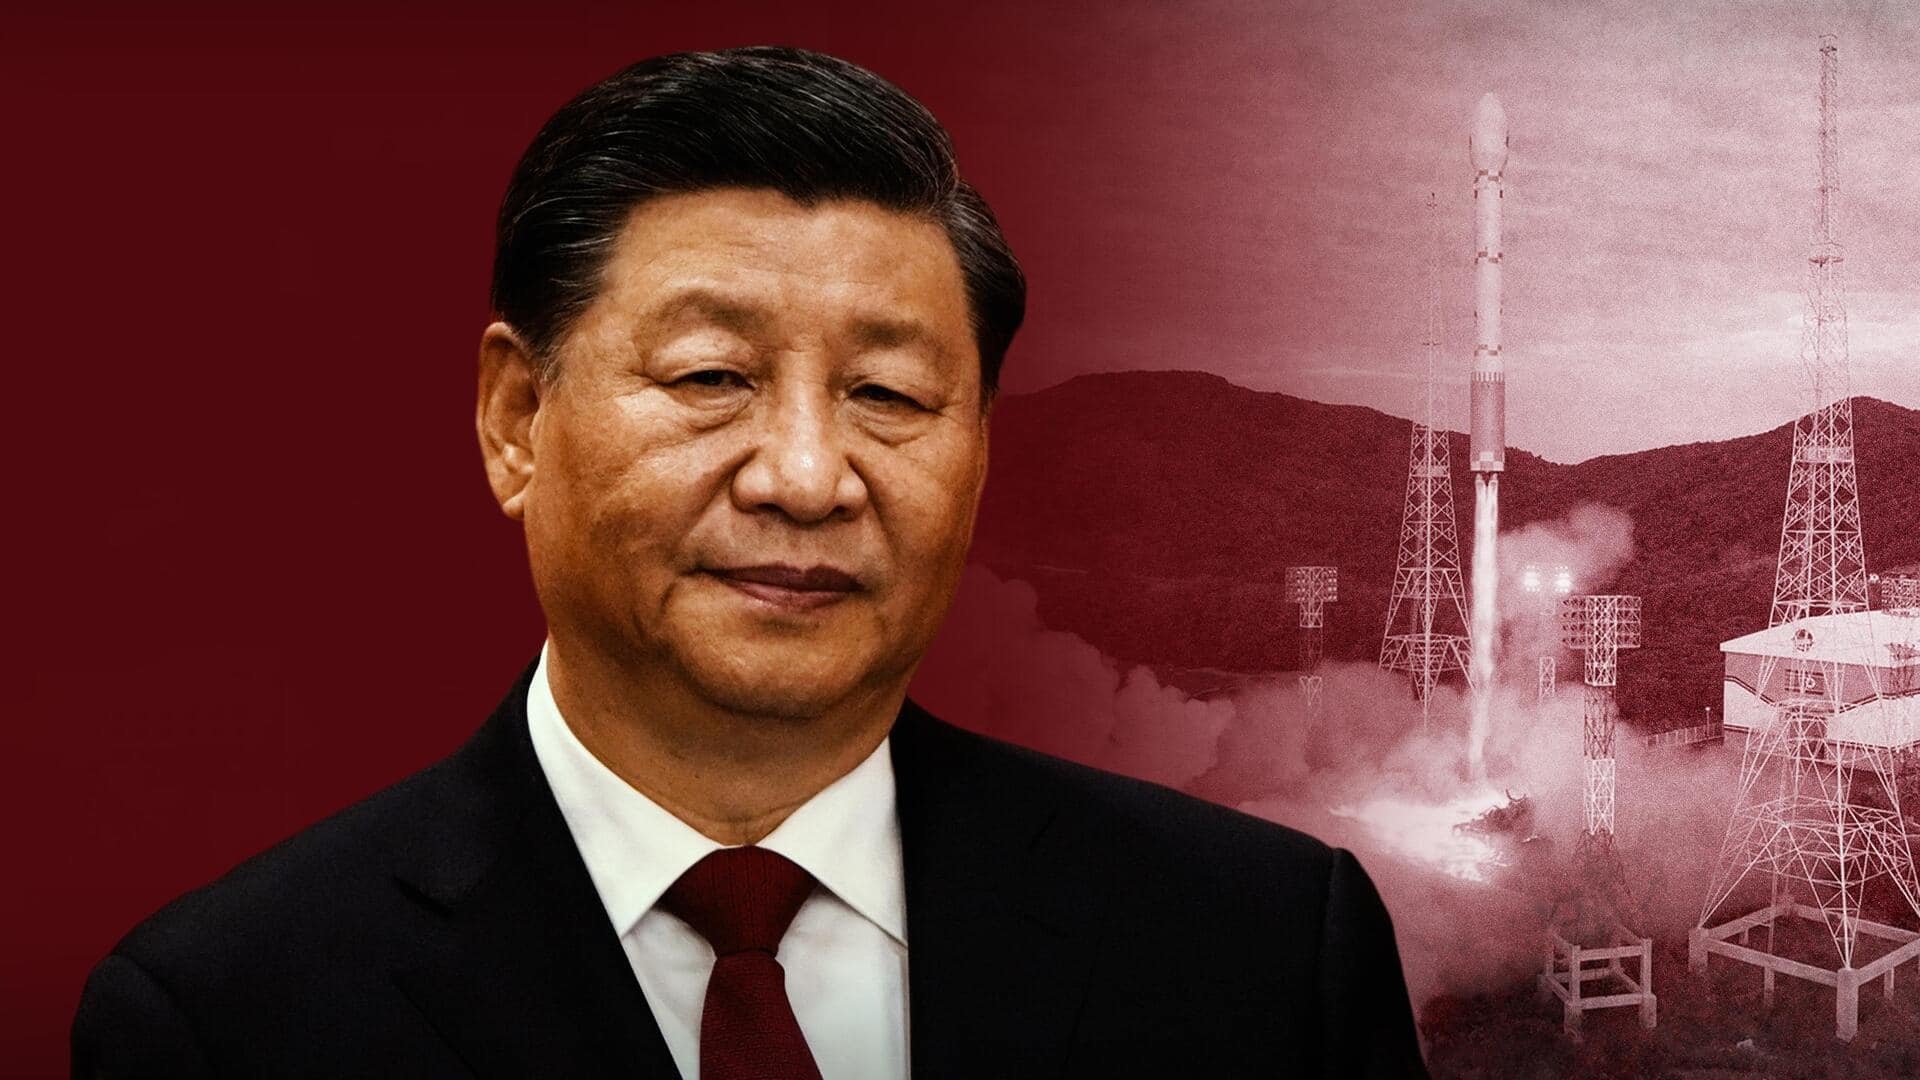 China launches new spy satellite: What are secret mission's objectives